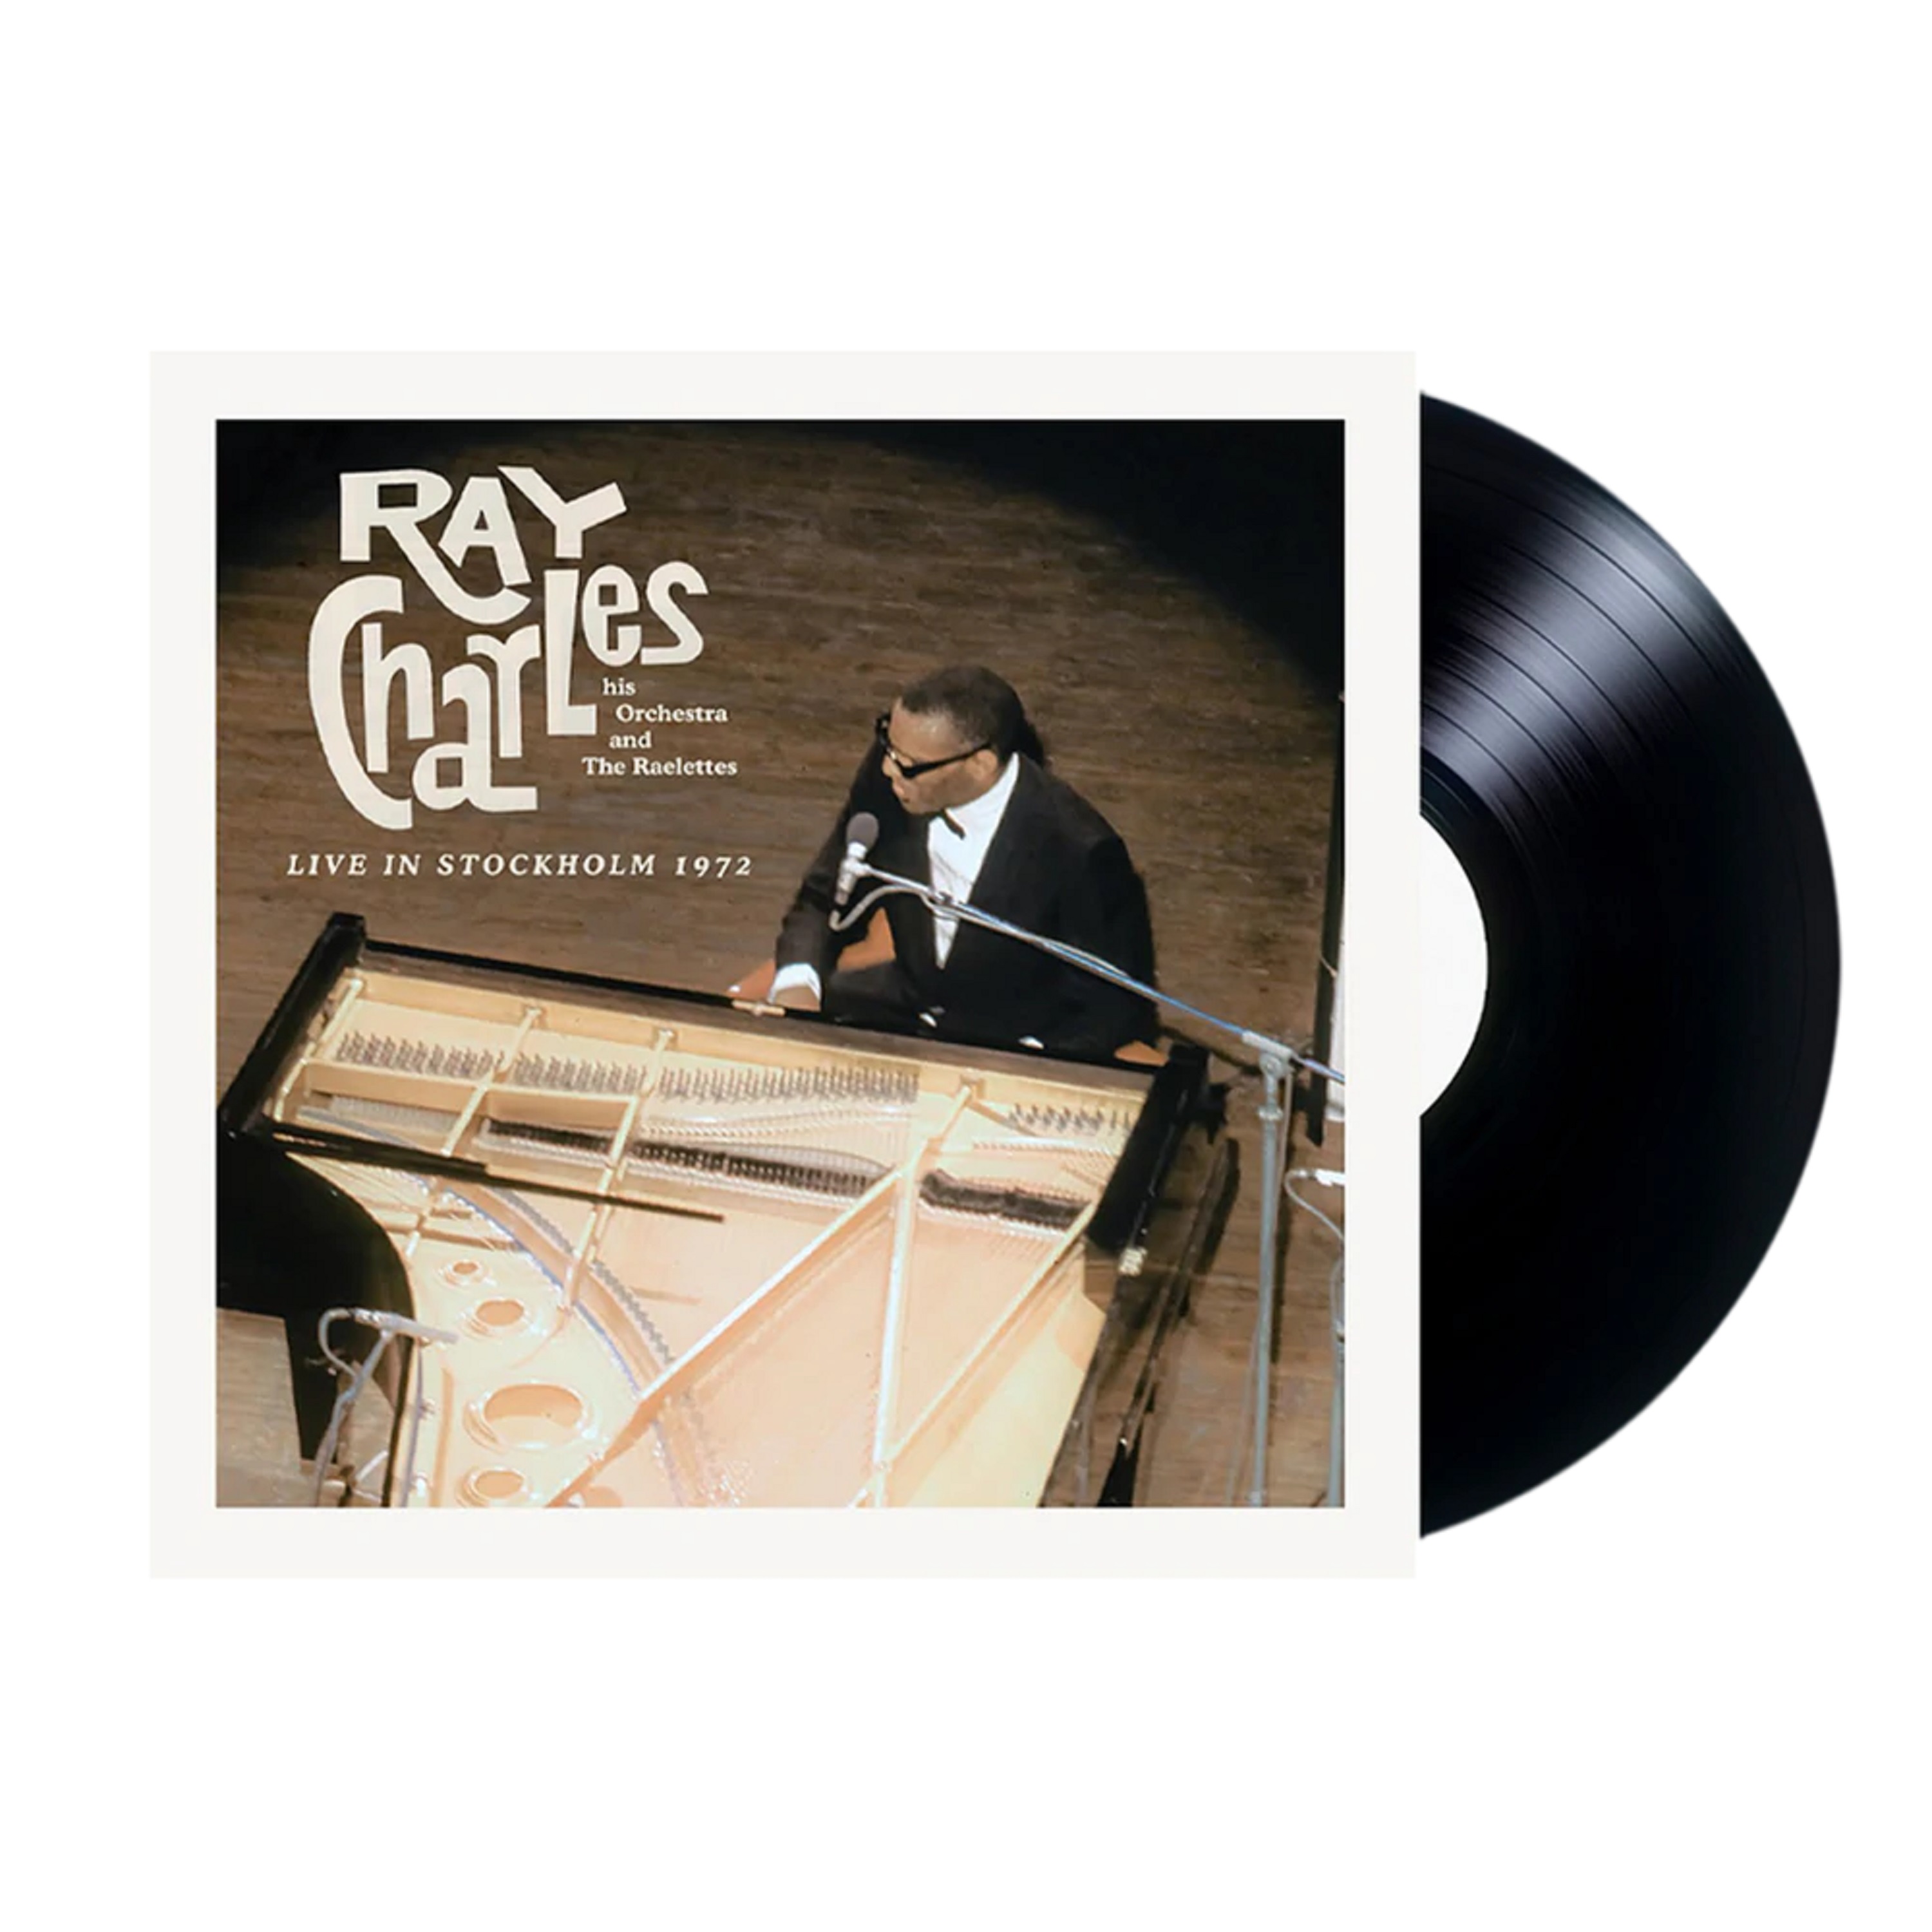 New Ray Charles Recordings "Live In Stockholm 1972" to be released May 6th